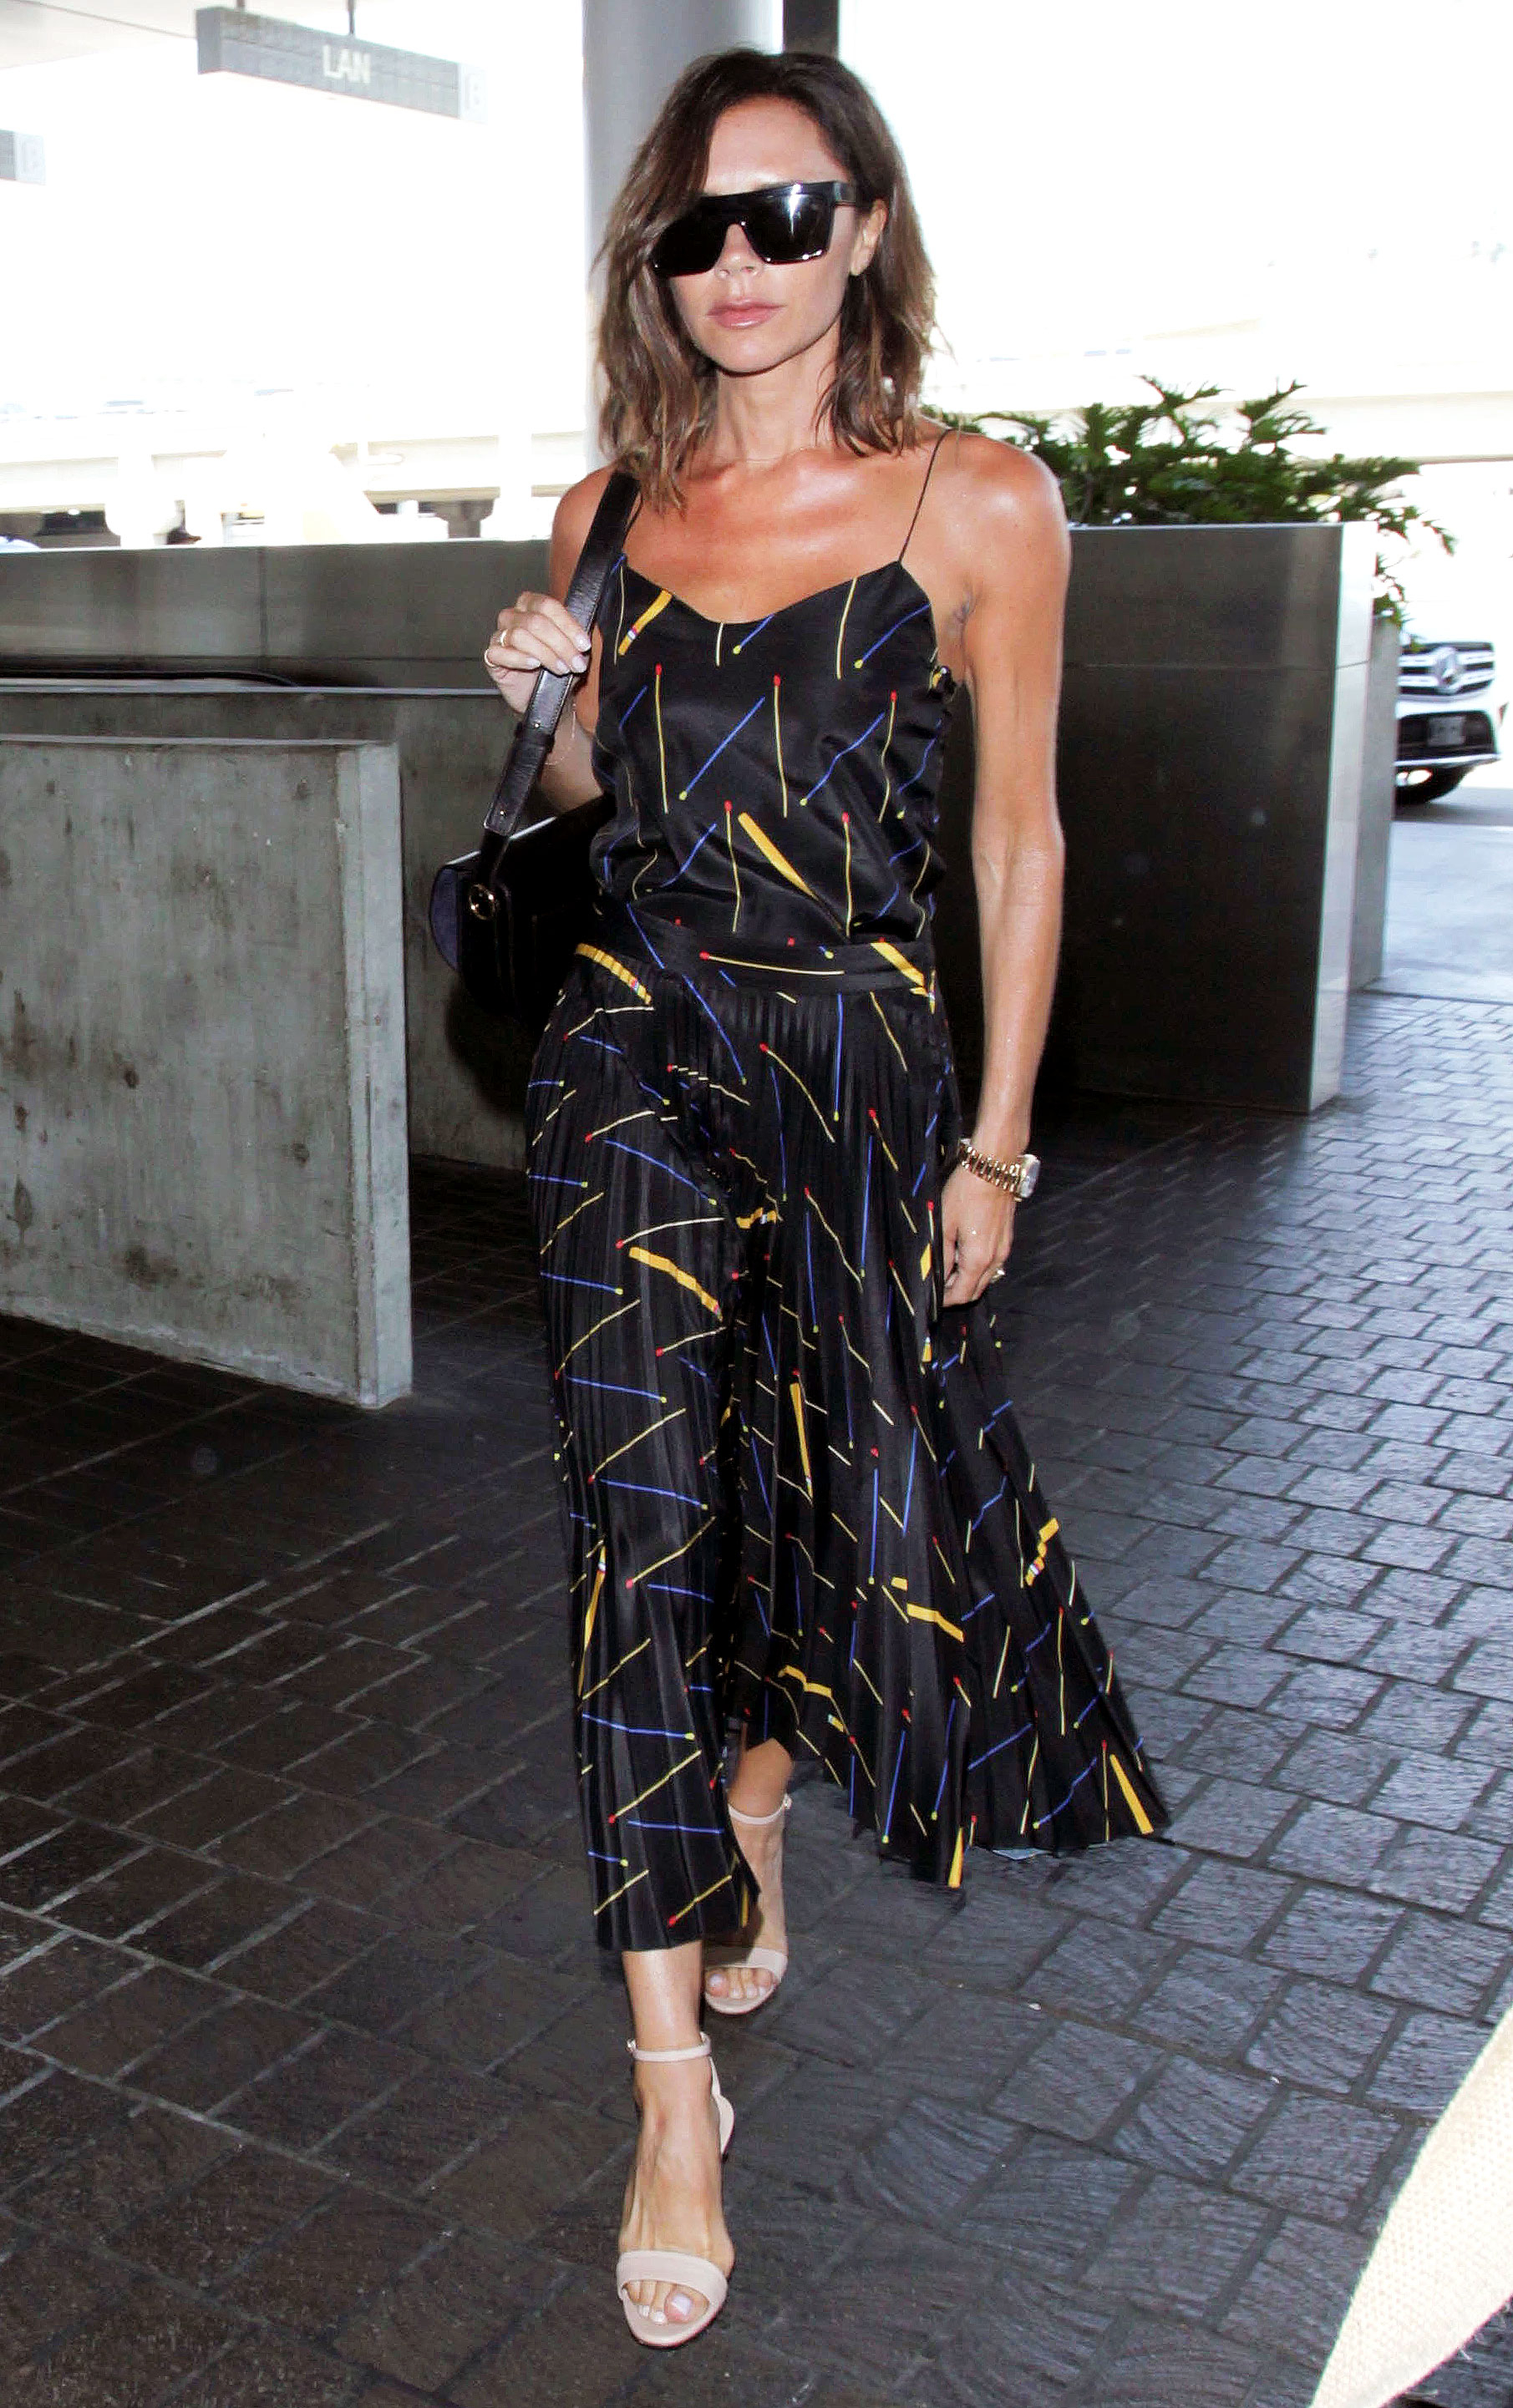 Victoria Beckham Glows in Boldly Printed Separates: Pics